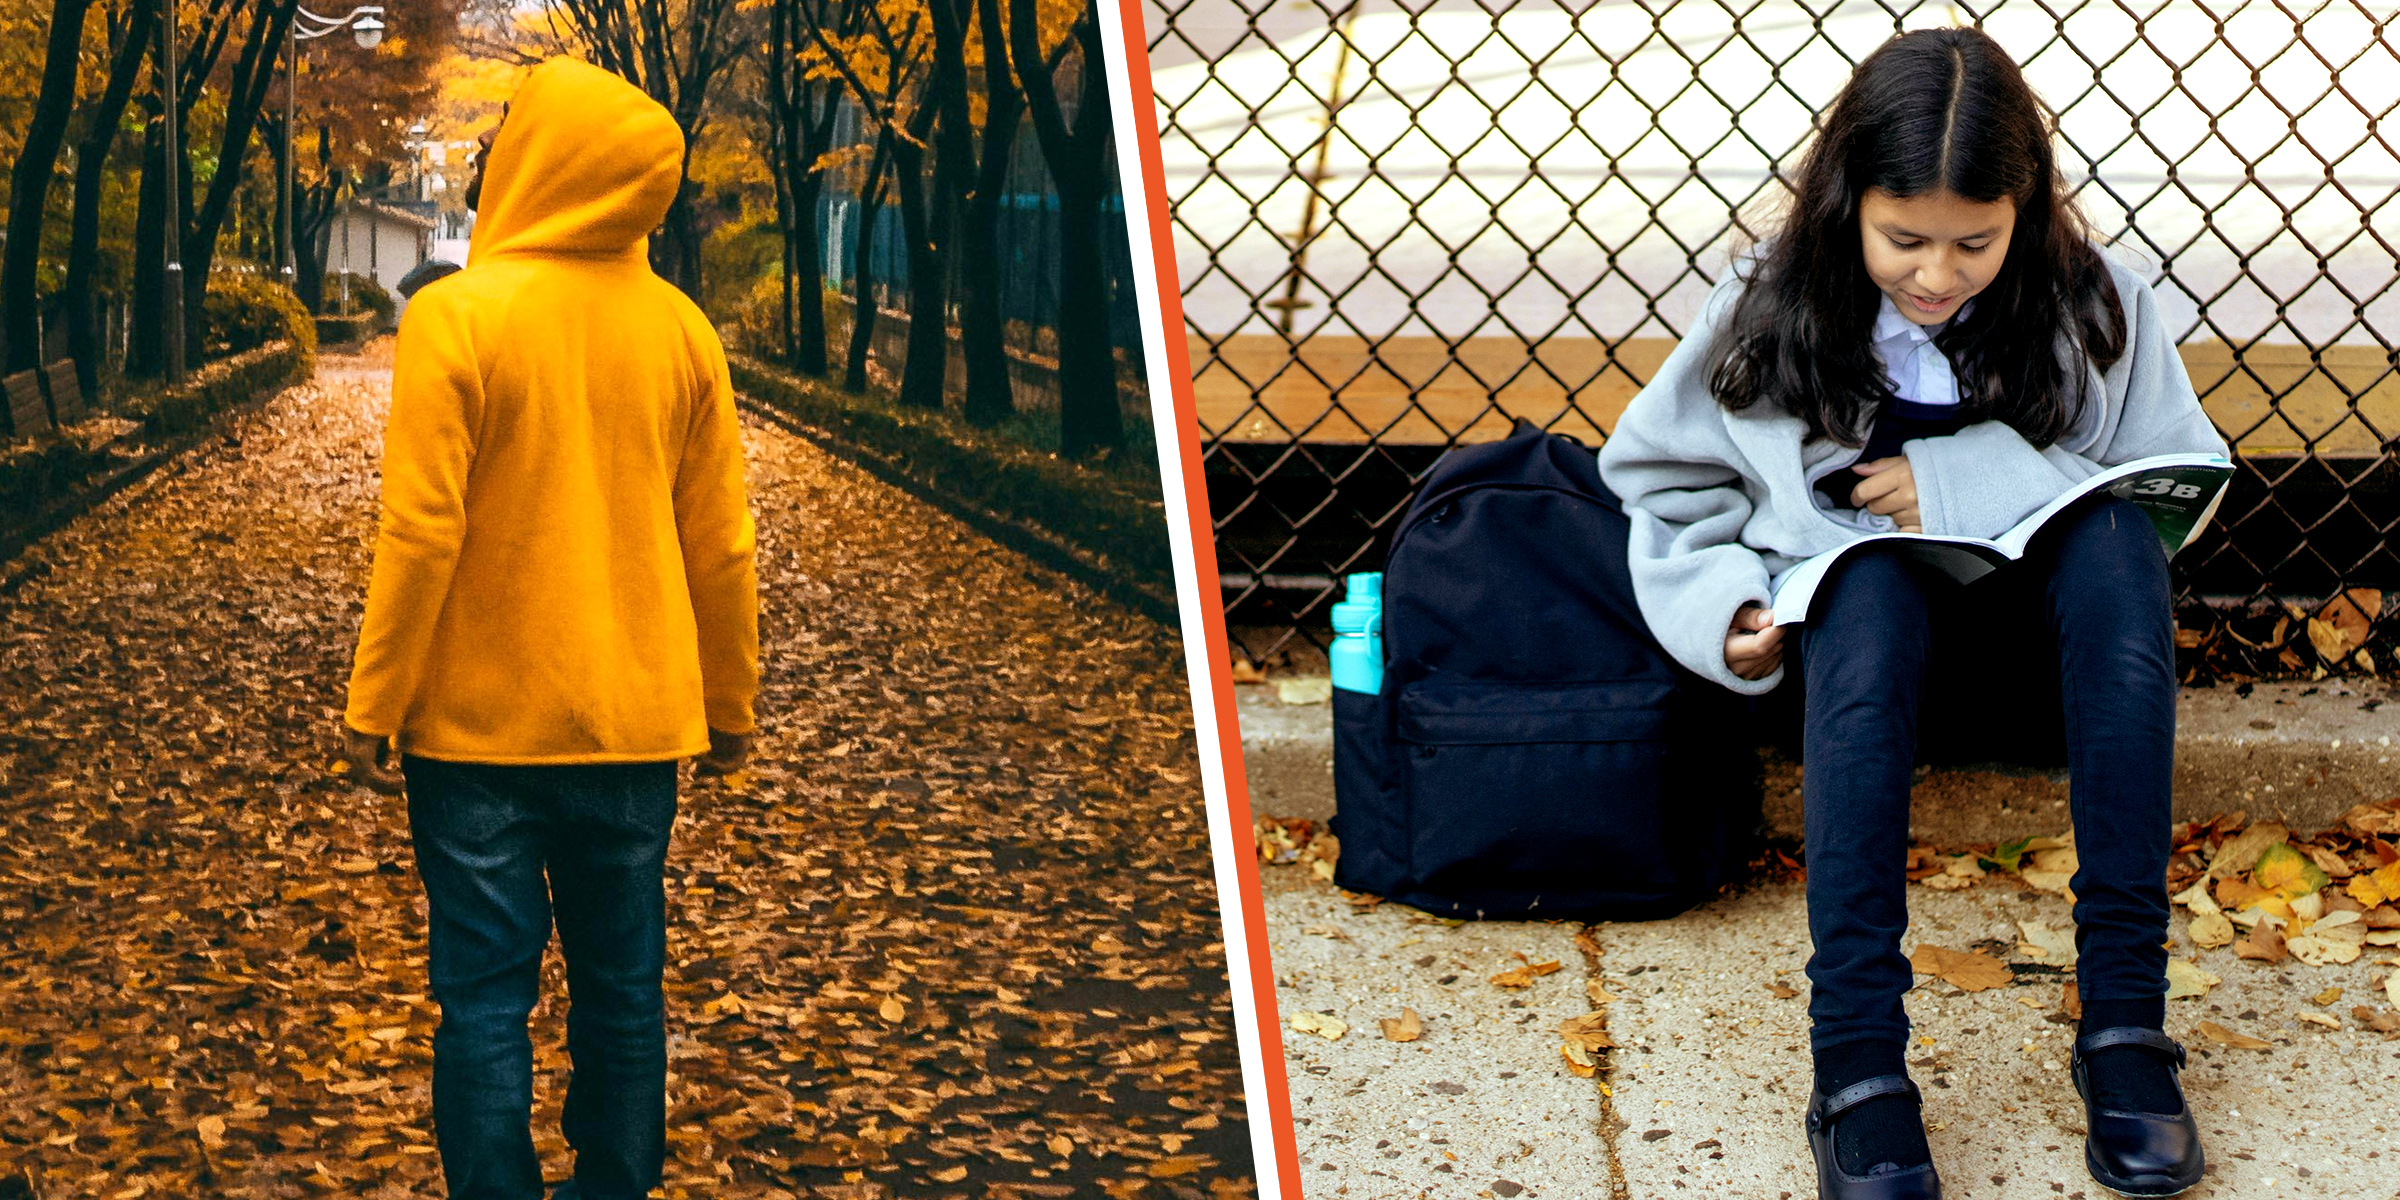 A person wears a yellow jacket | A young woman reads a book | Source: Pexels/Mary Taylor | Pexels/Taryn Elliott